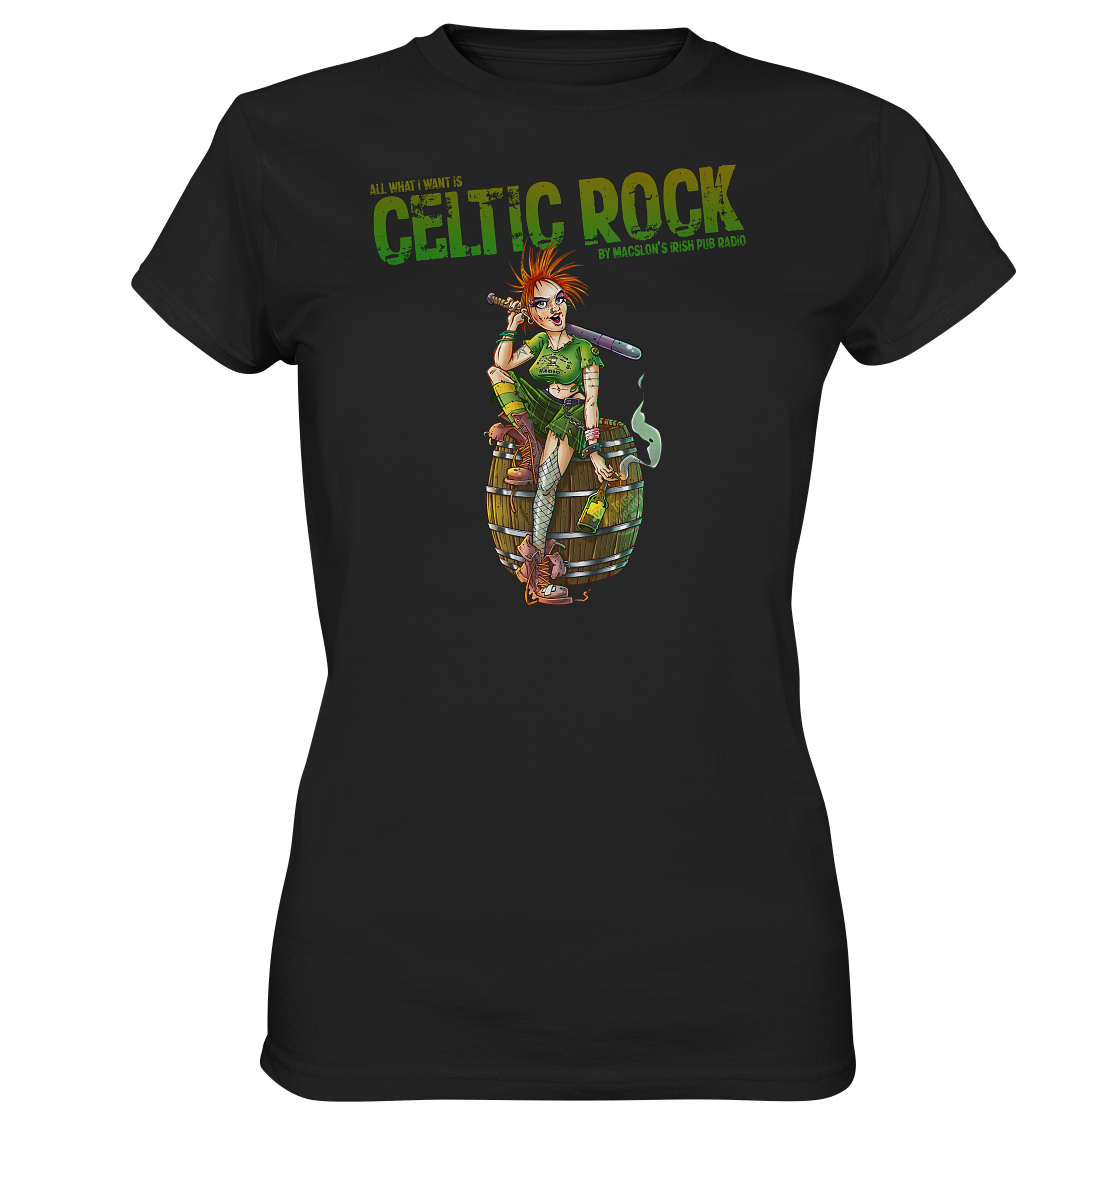 All What I Want Is "Celtic Rock" - Ladies Premium Shirt